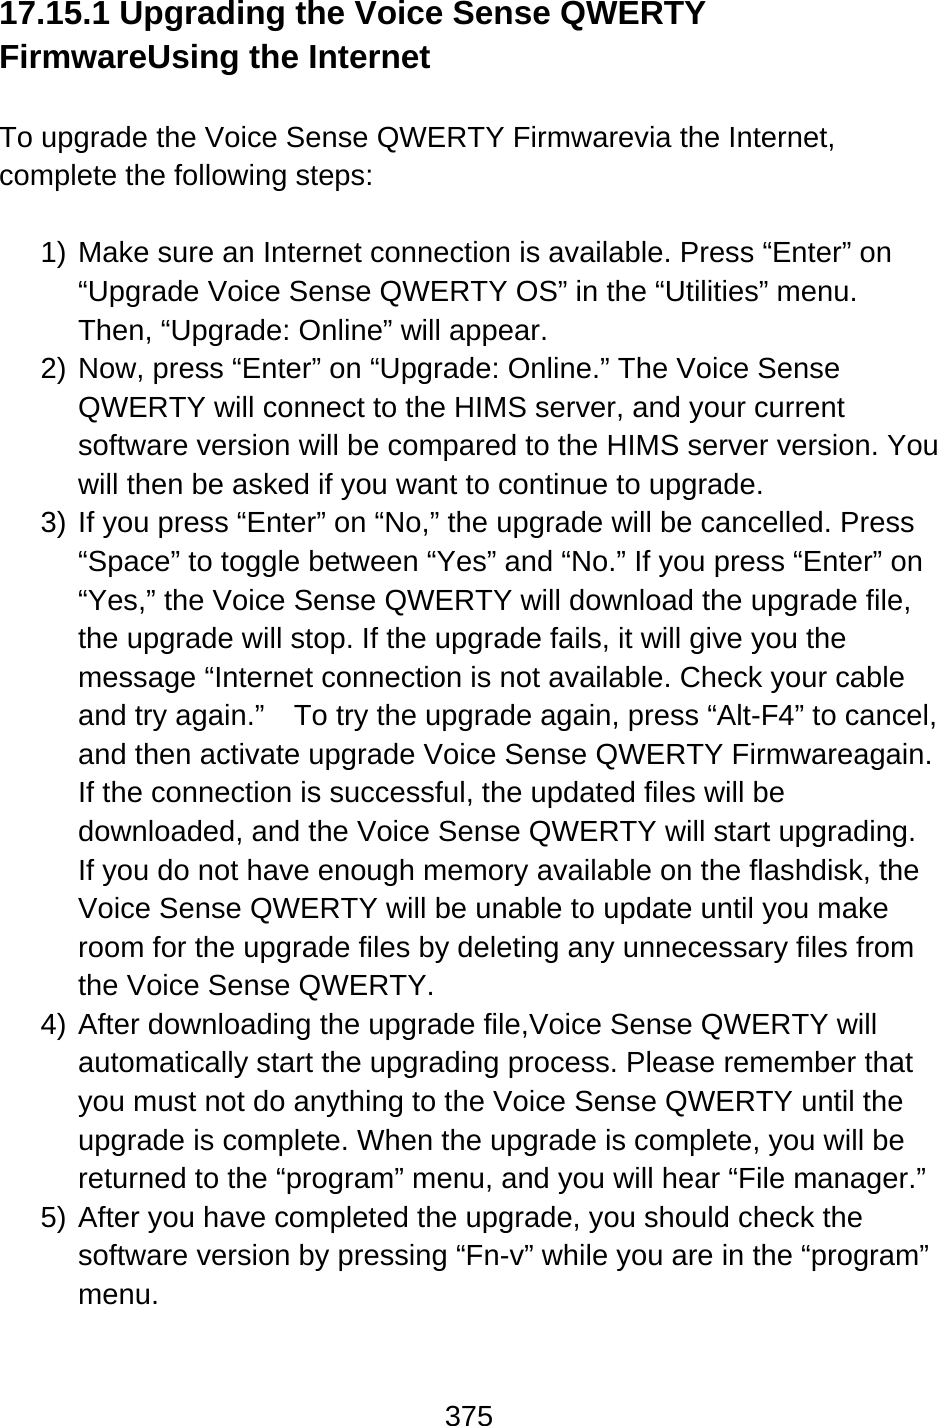 375  17.15.1 Upgrading the Voice Sense QWERTY FirmwareUsing the Internet  To upgrade the Voice Sense QWERTY Firmwarevia the Internet, complete the following steps:  1) Make sure an Internet connection is available. Press “Enter” on “Upgrade Voice Sense QWERTY OS” in the “Utilities” menu.   Then, “Upgrade: Online” will appear. 2) Now, press “Enter” on “Upgrade: Online.” The Voice Sense QWERTY will connect to the HIMS server, and your current software version will be compared to the HIMS server version. You will then be asked if you want to continue to upgrade. 3) If you press “Enter” on “No,” the upgrade will be cancelled. Press “Space” to toggle between “Yes” and “No.” If you press “Enter” on “Yes,” the Voice Sense QWERTY will download the upgrade file, the upgrade will stop. If the upgrade fails, it will give you the message “Internet connection is not available. Check your cable and try again.”    To try the upgrade again, press “Alt-F4” to cancel, and then activate upgrade Voice Sense QWERTY Firmwareagain. If the connection is successful, the updated files will be downloaded, and the Voice Sense QWERTY will start upgrading. If you do not have enough memory available on the flashdisk, the Voice Sense QWERTY will be unable to update until you make room for the upgrade files by deleting any unnecessary files from the Voice Sense QWERTY. 4) After downloading the upgrade file,Voice Sense QWERTY will automatically start the upgrading process. Please remember that you must not do anything to the Voice Sense QWERTY until the upgrade is complete. When the upgrade is complete, you will be returned to the “program” menu, and you will hear “File manager.” 5) After you have completed the upgrade, you should check the software version by pressing “Fn-v” while you are in the “program” menu.  